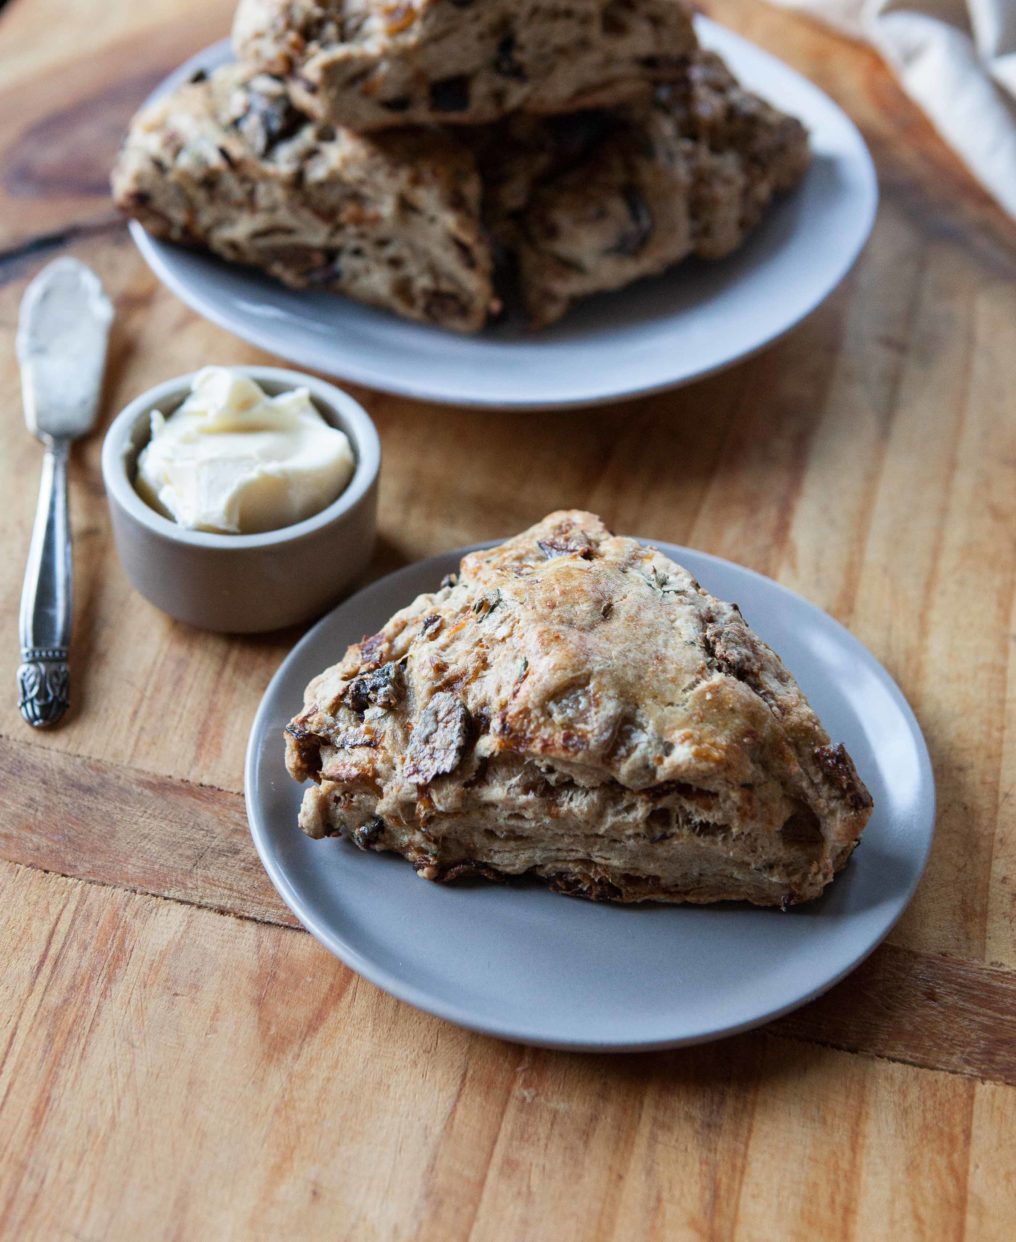 If you prefer salty foods for breakfast, you'll love this savory scone recipe. Fig & Caramelized Savory Scones are great for brunch too!